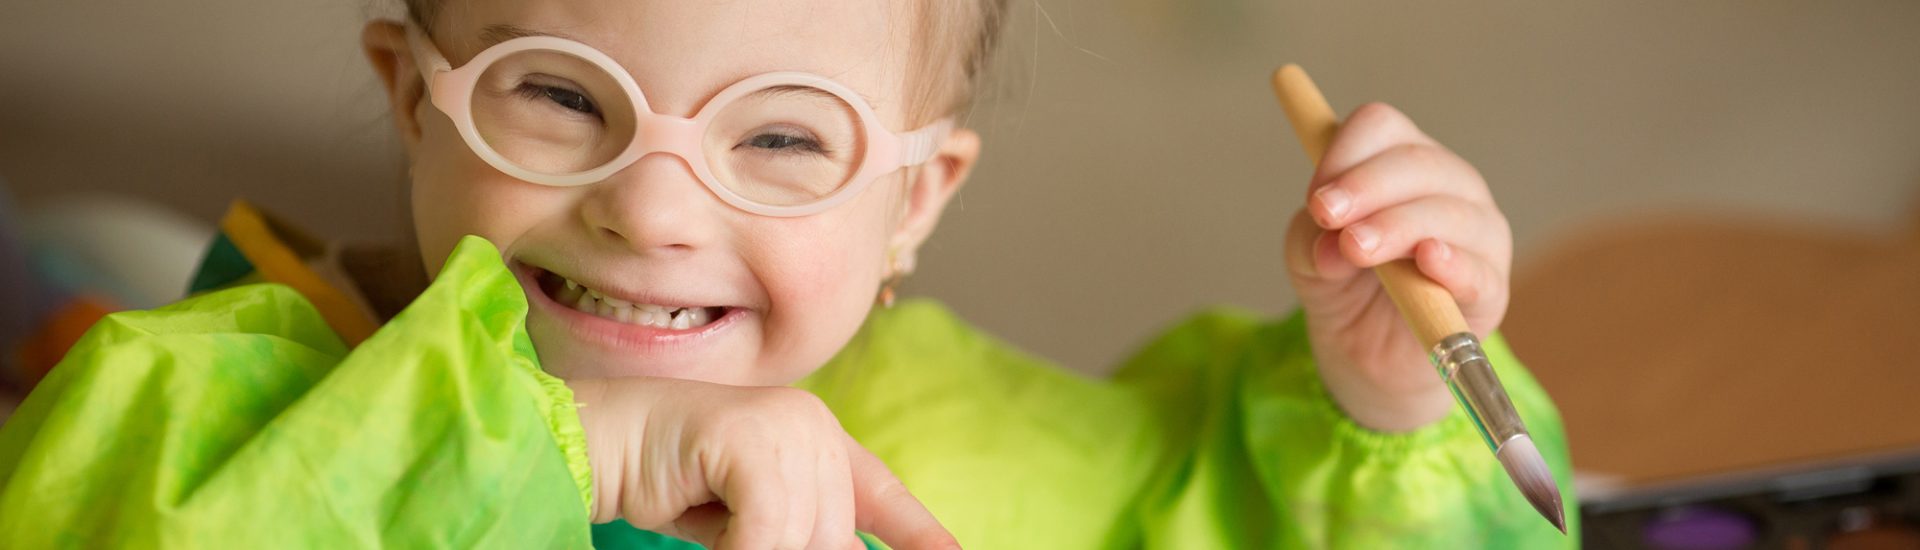 Child wearing glasses laughing while holding a paint brush